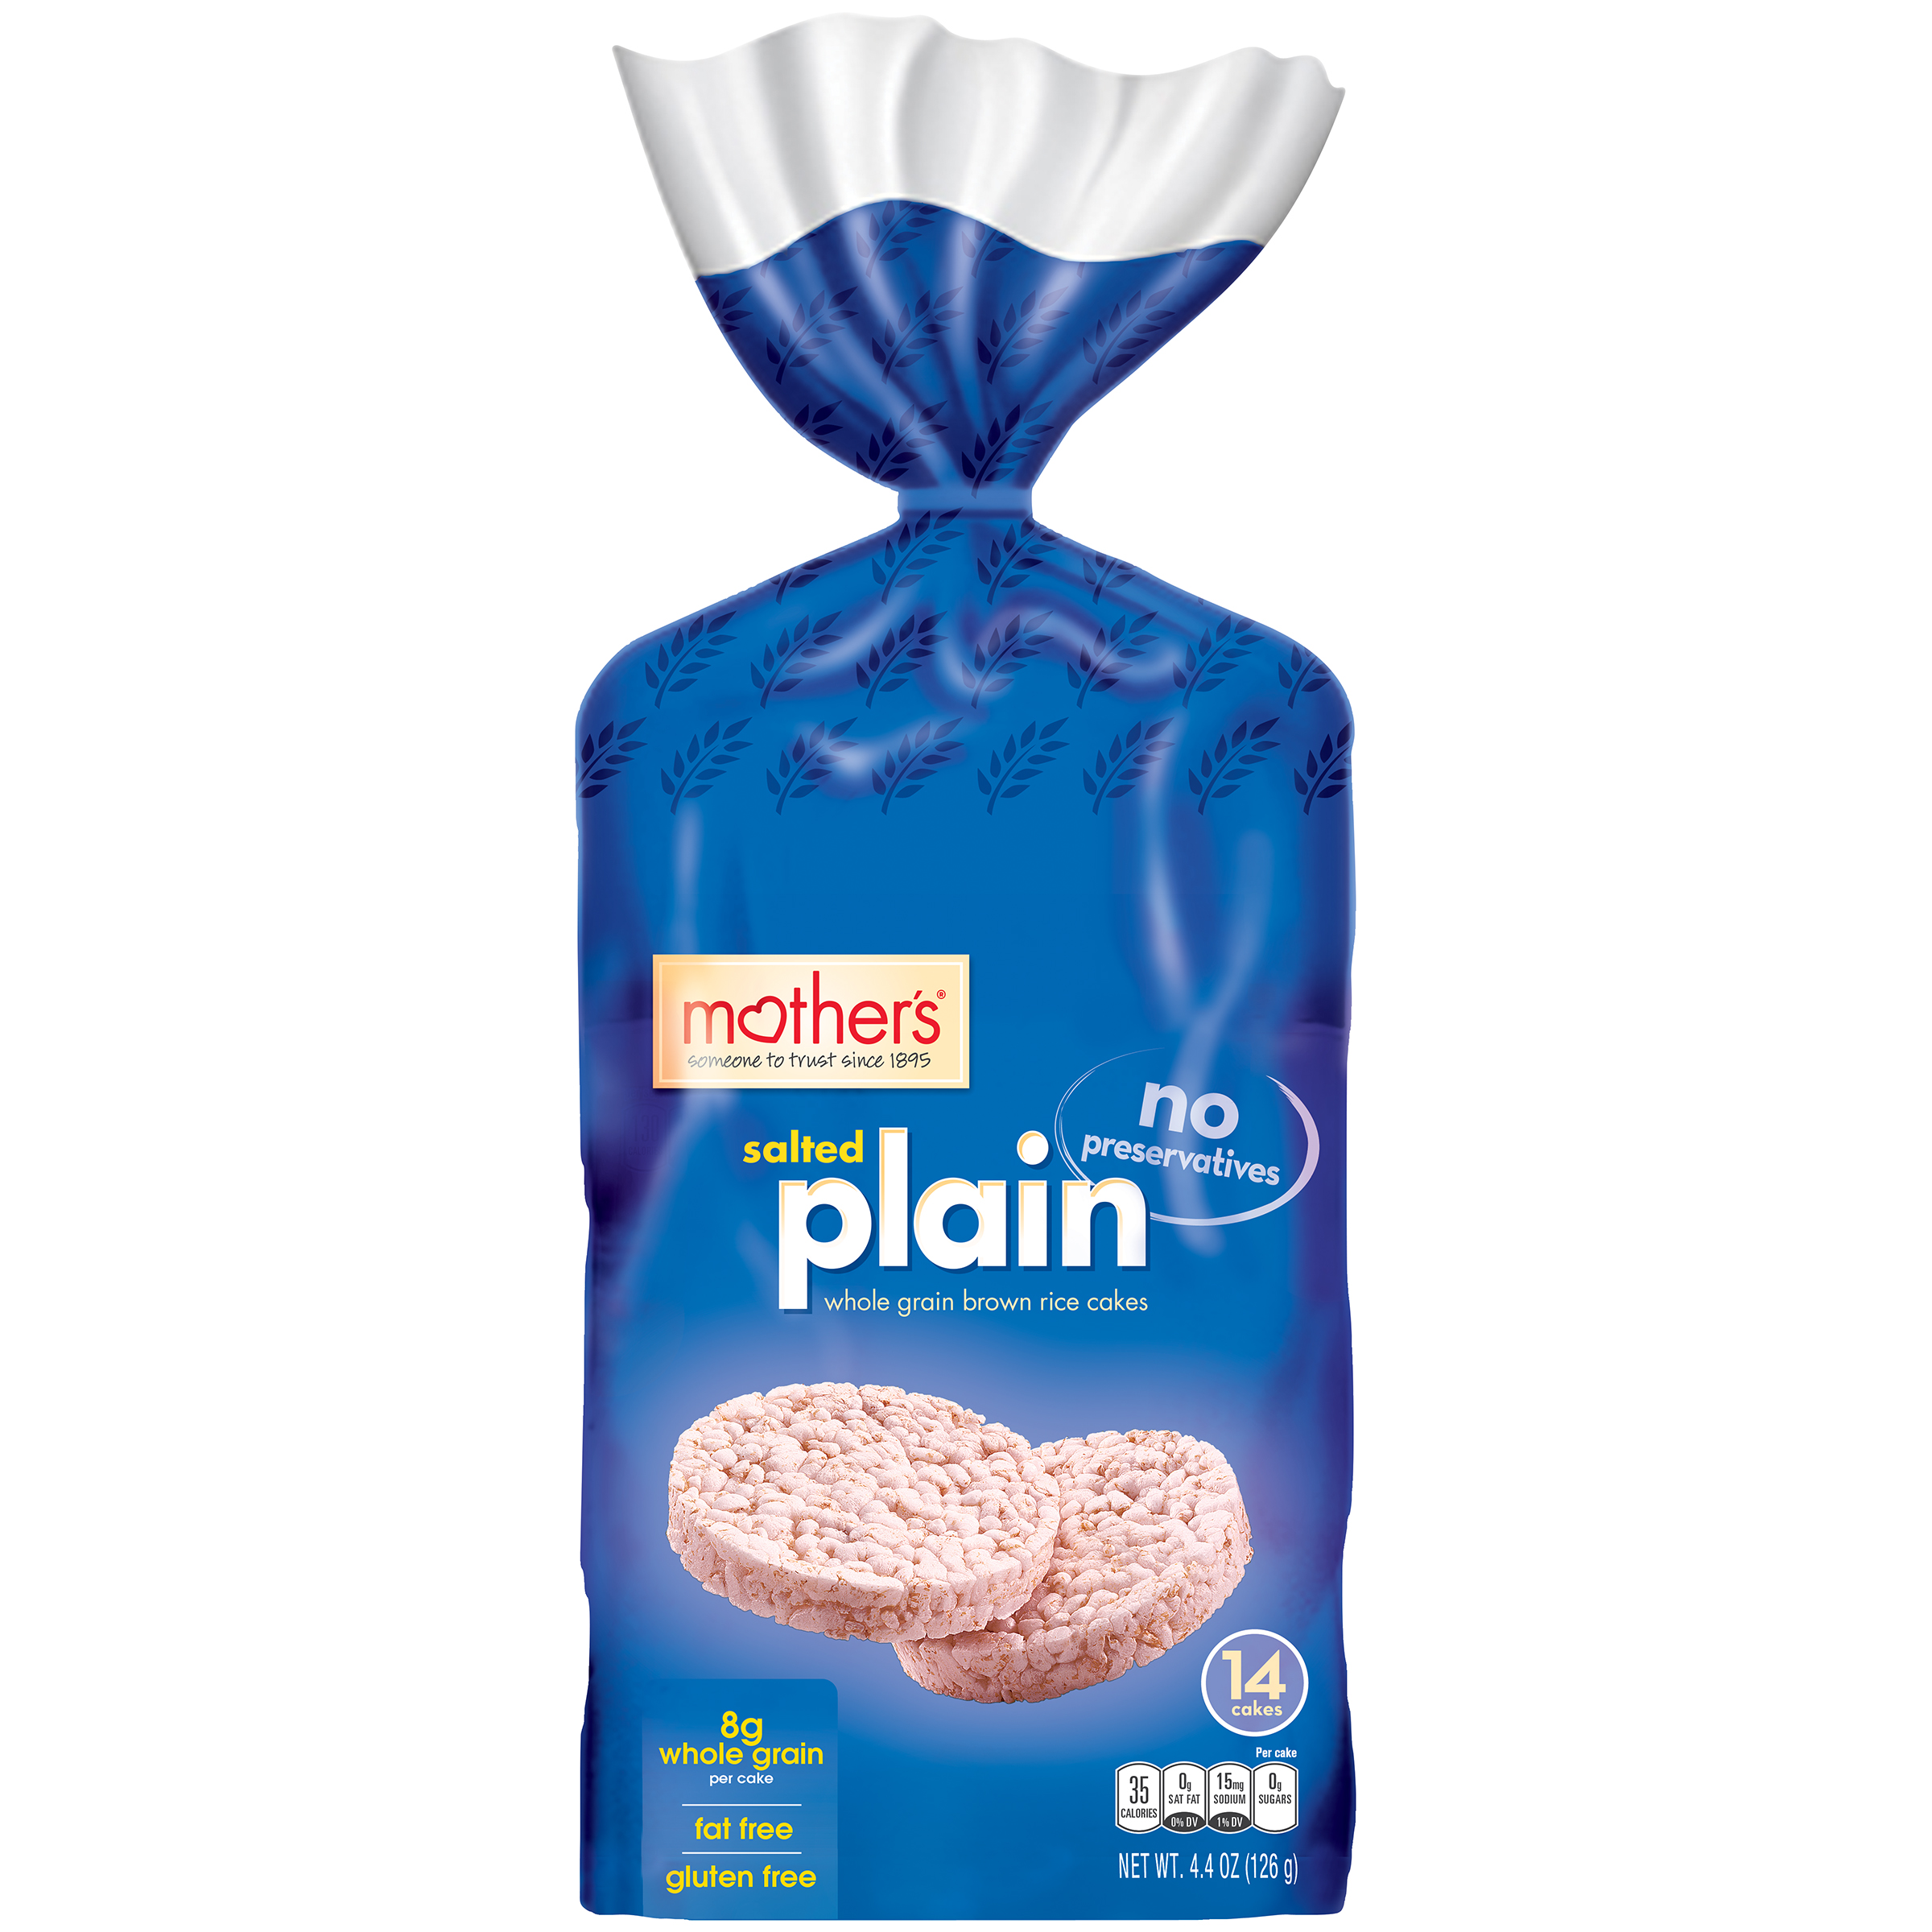 Mother's Rice Cakes, Plain, Salted, 4.5 oz (127 g)